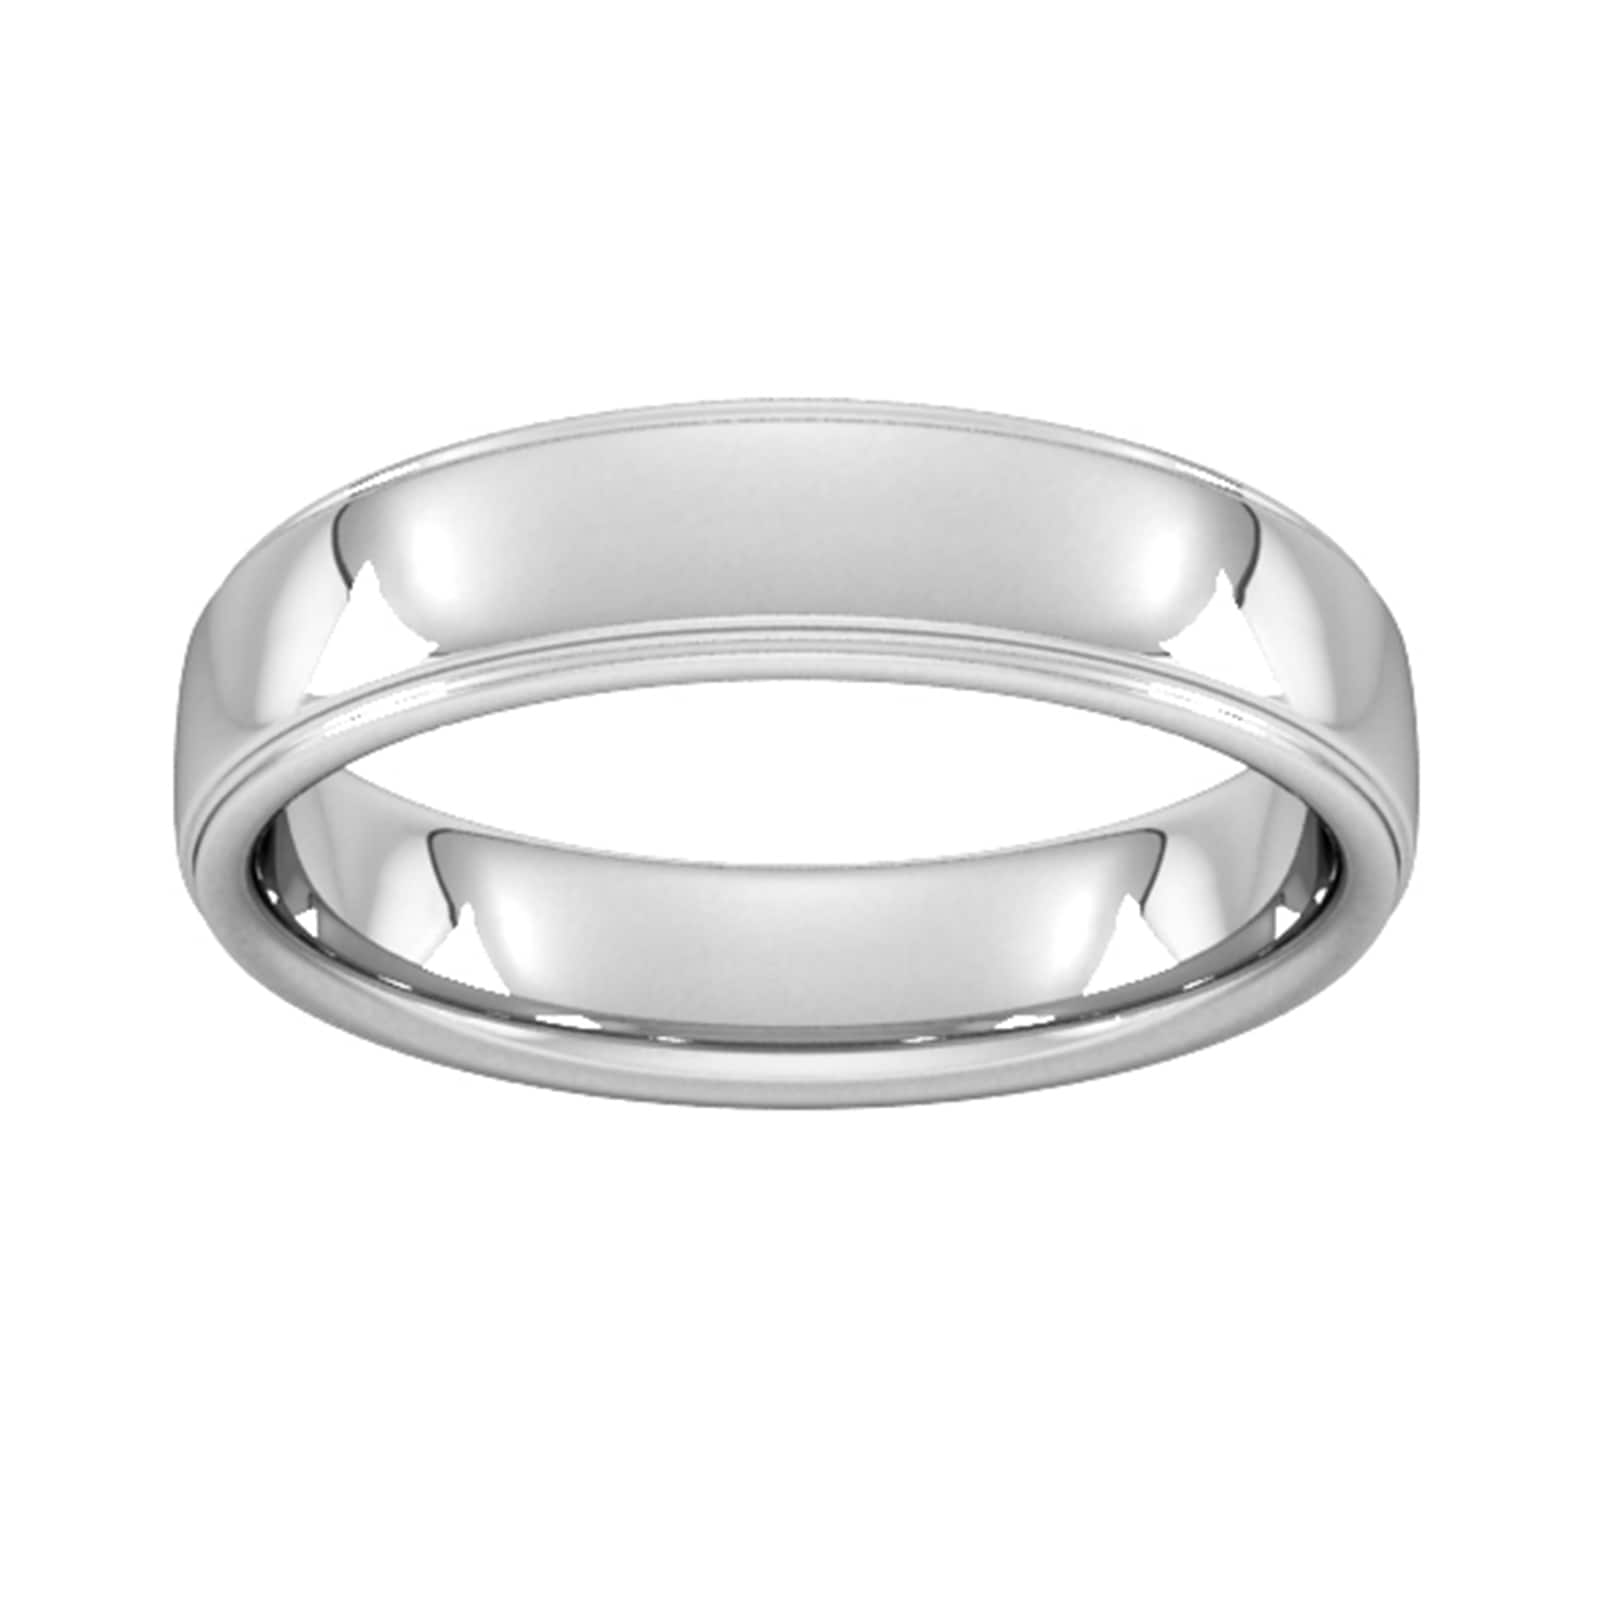 5mm Slight Court Extra Heavy Polished Finish With Grooves Wedding Ring In Platinum - Ring Size L